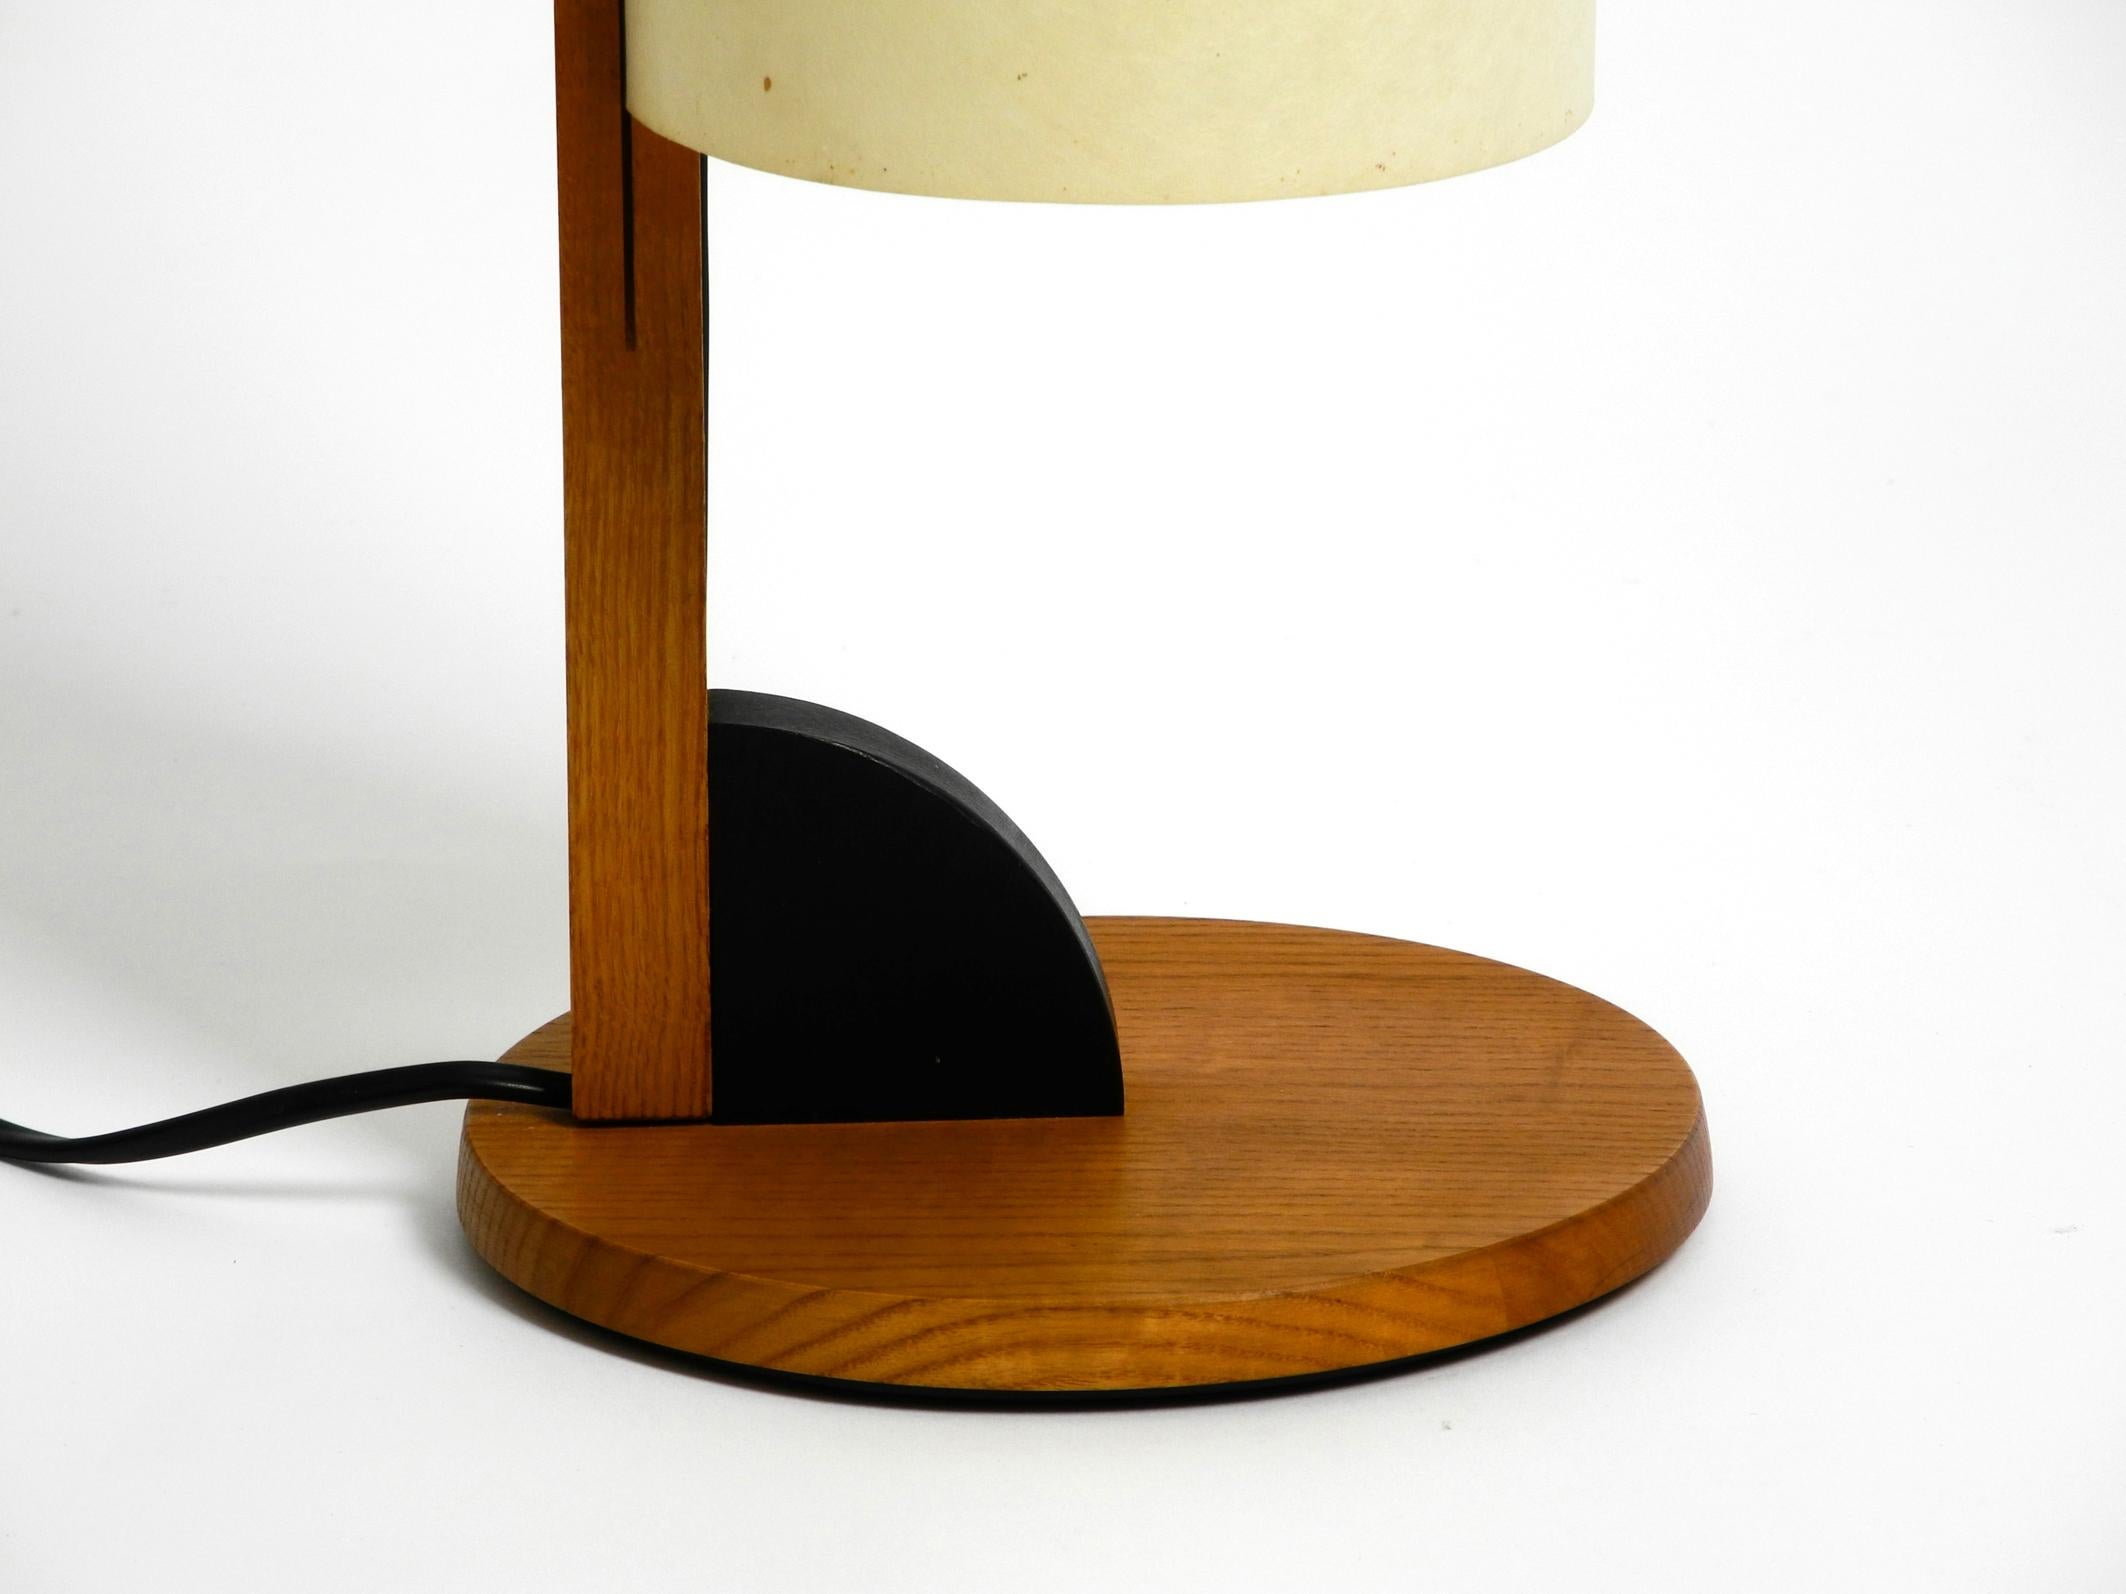 Late 20th Century Beautiful Large Minimalist Teak Table Lamp with Lunopal Shade by Domus 80s